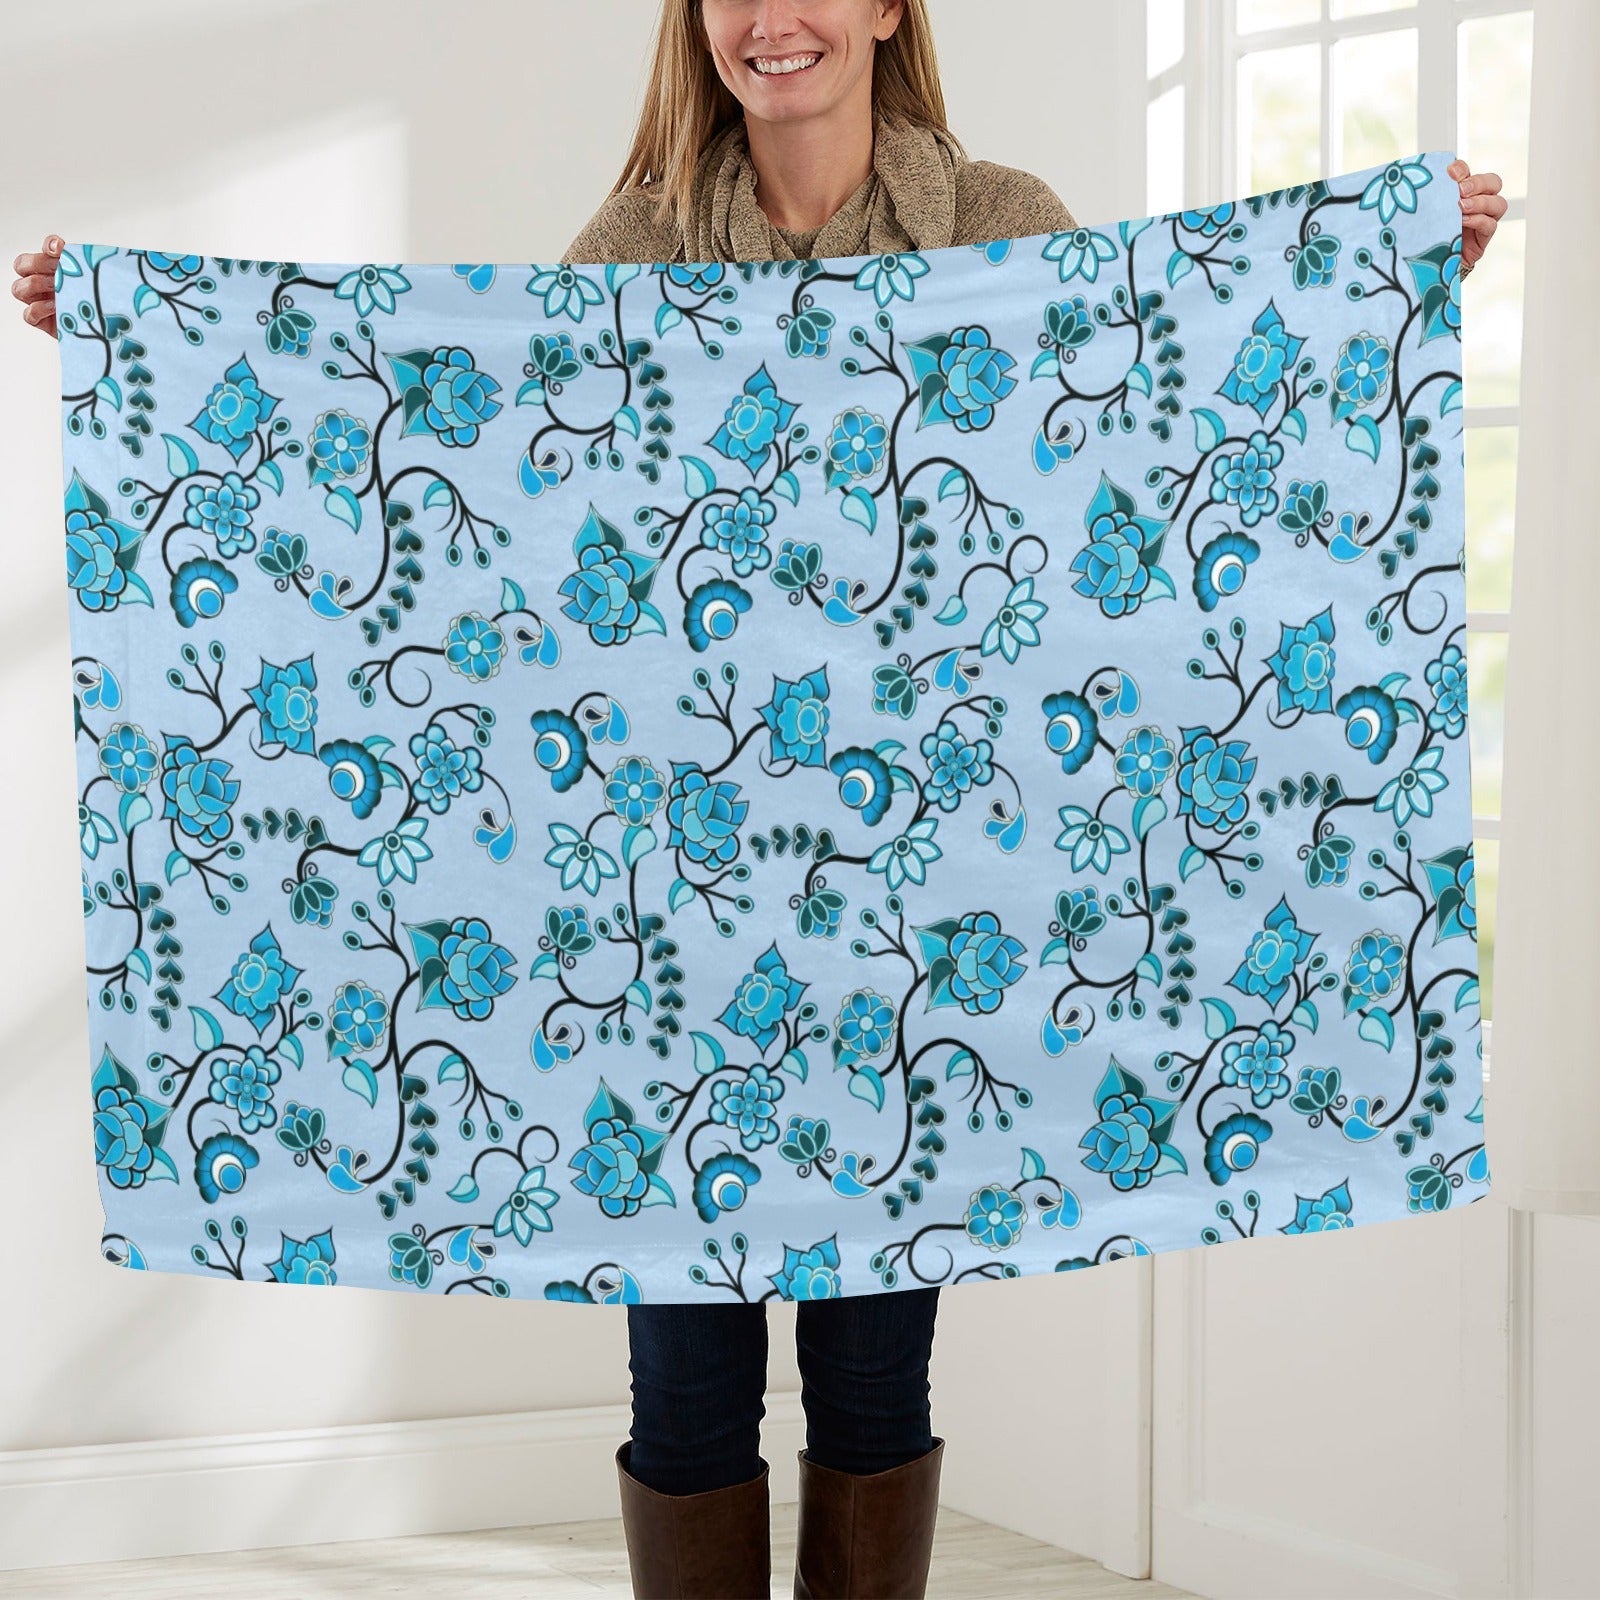 Blue Floral Amour Baby Blanket 40"x50" Baby Blanket 40"x50" e-joyer 